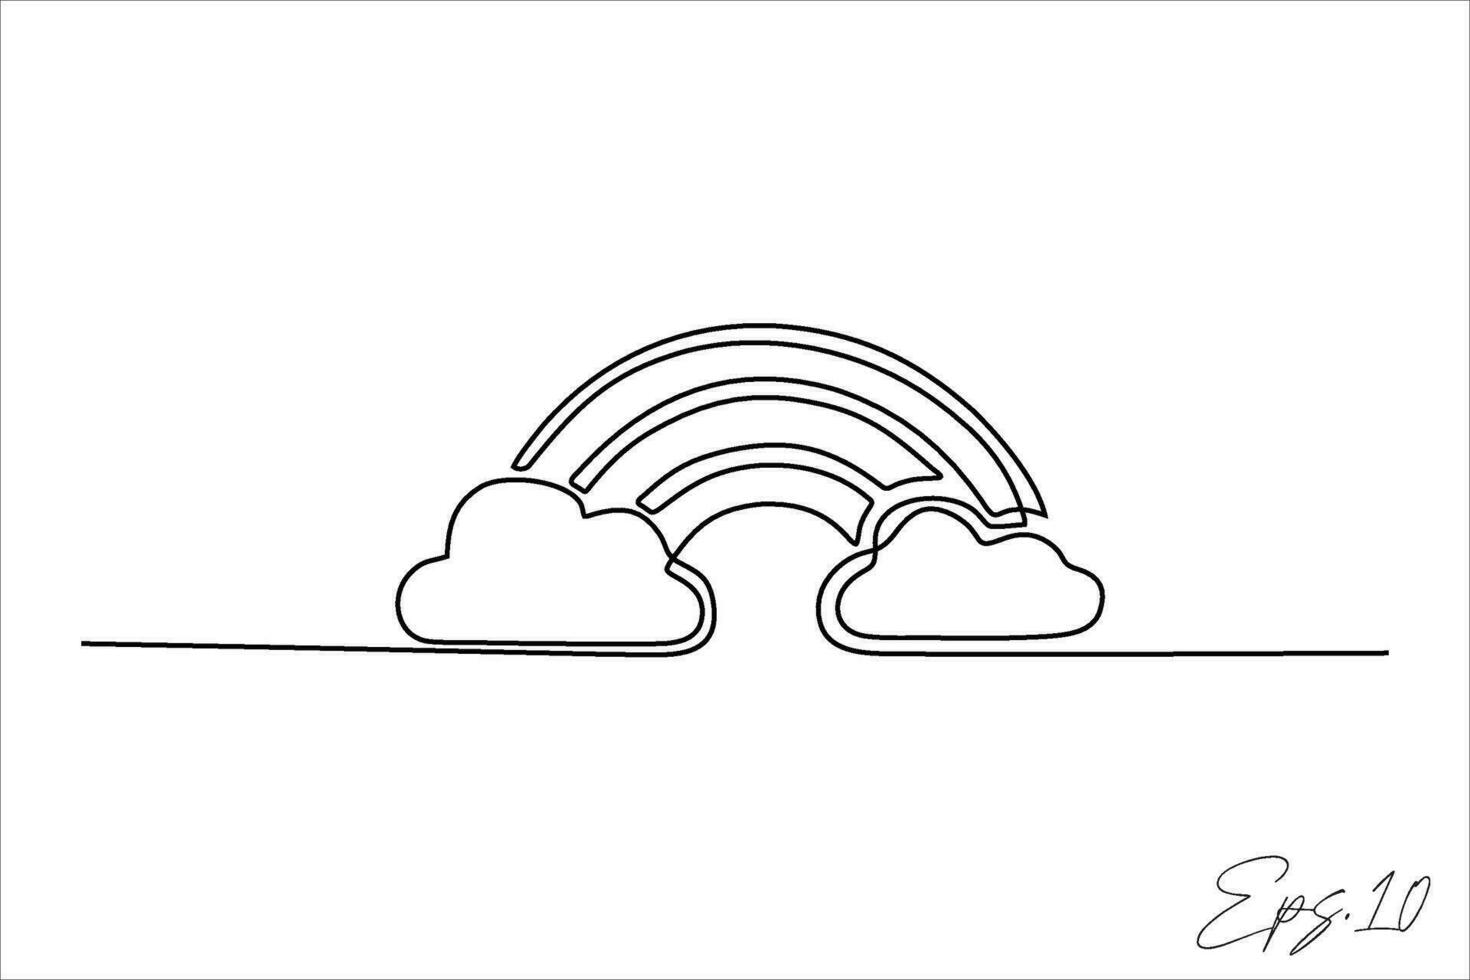 continuous line vector illustration design of clouds with rainbow